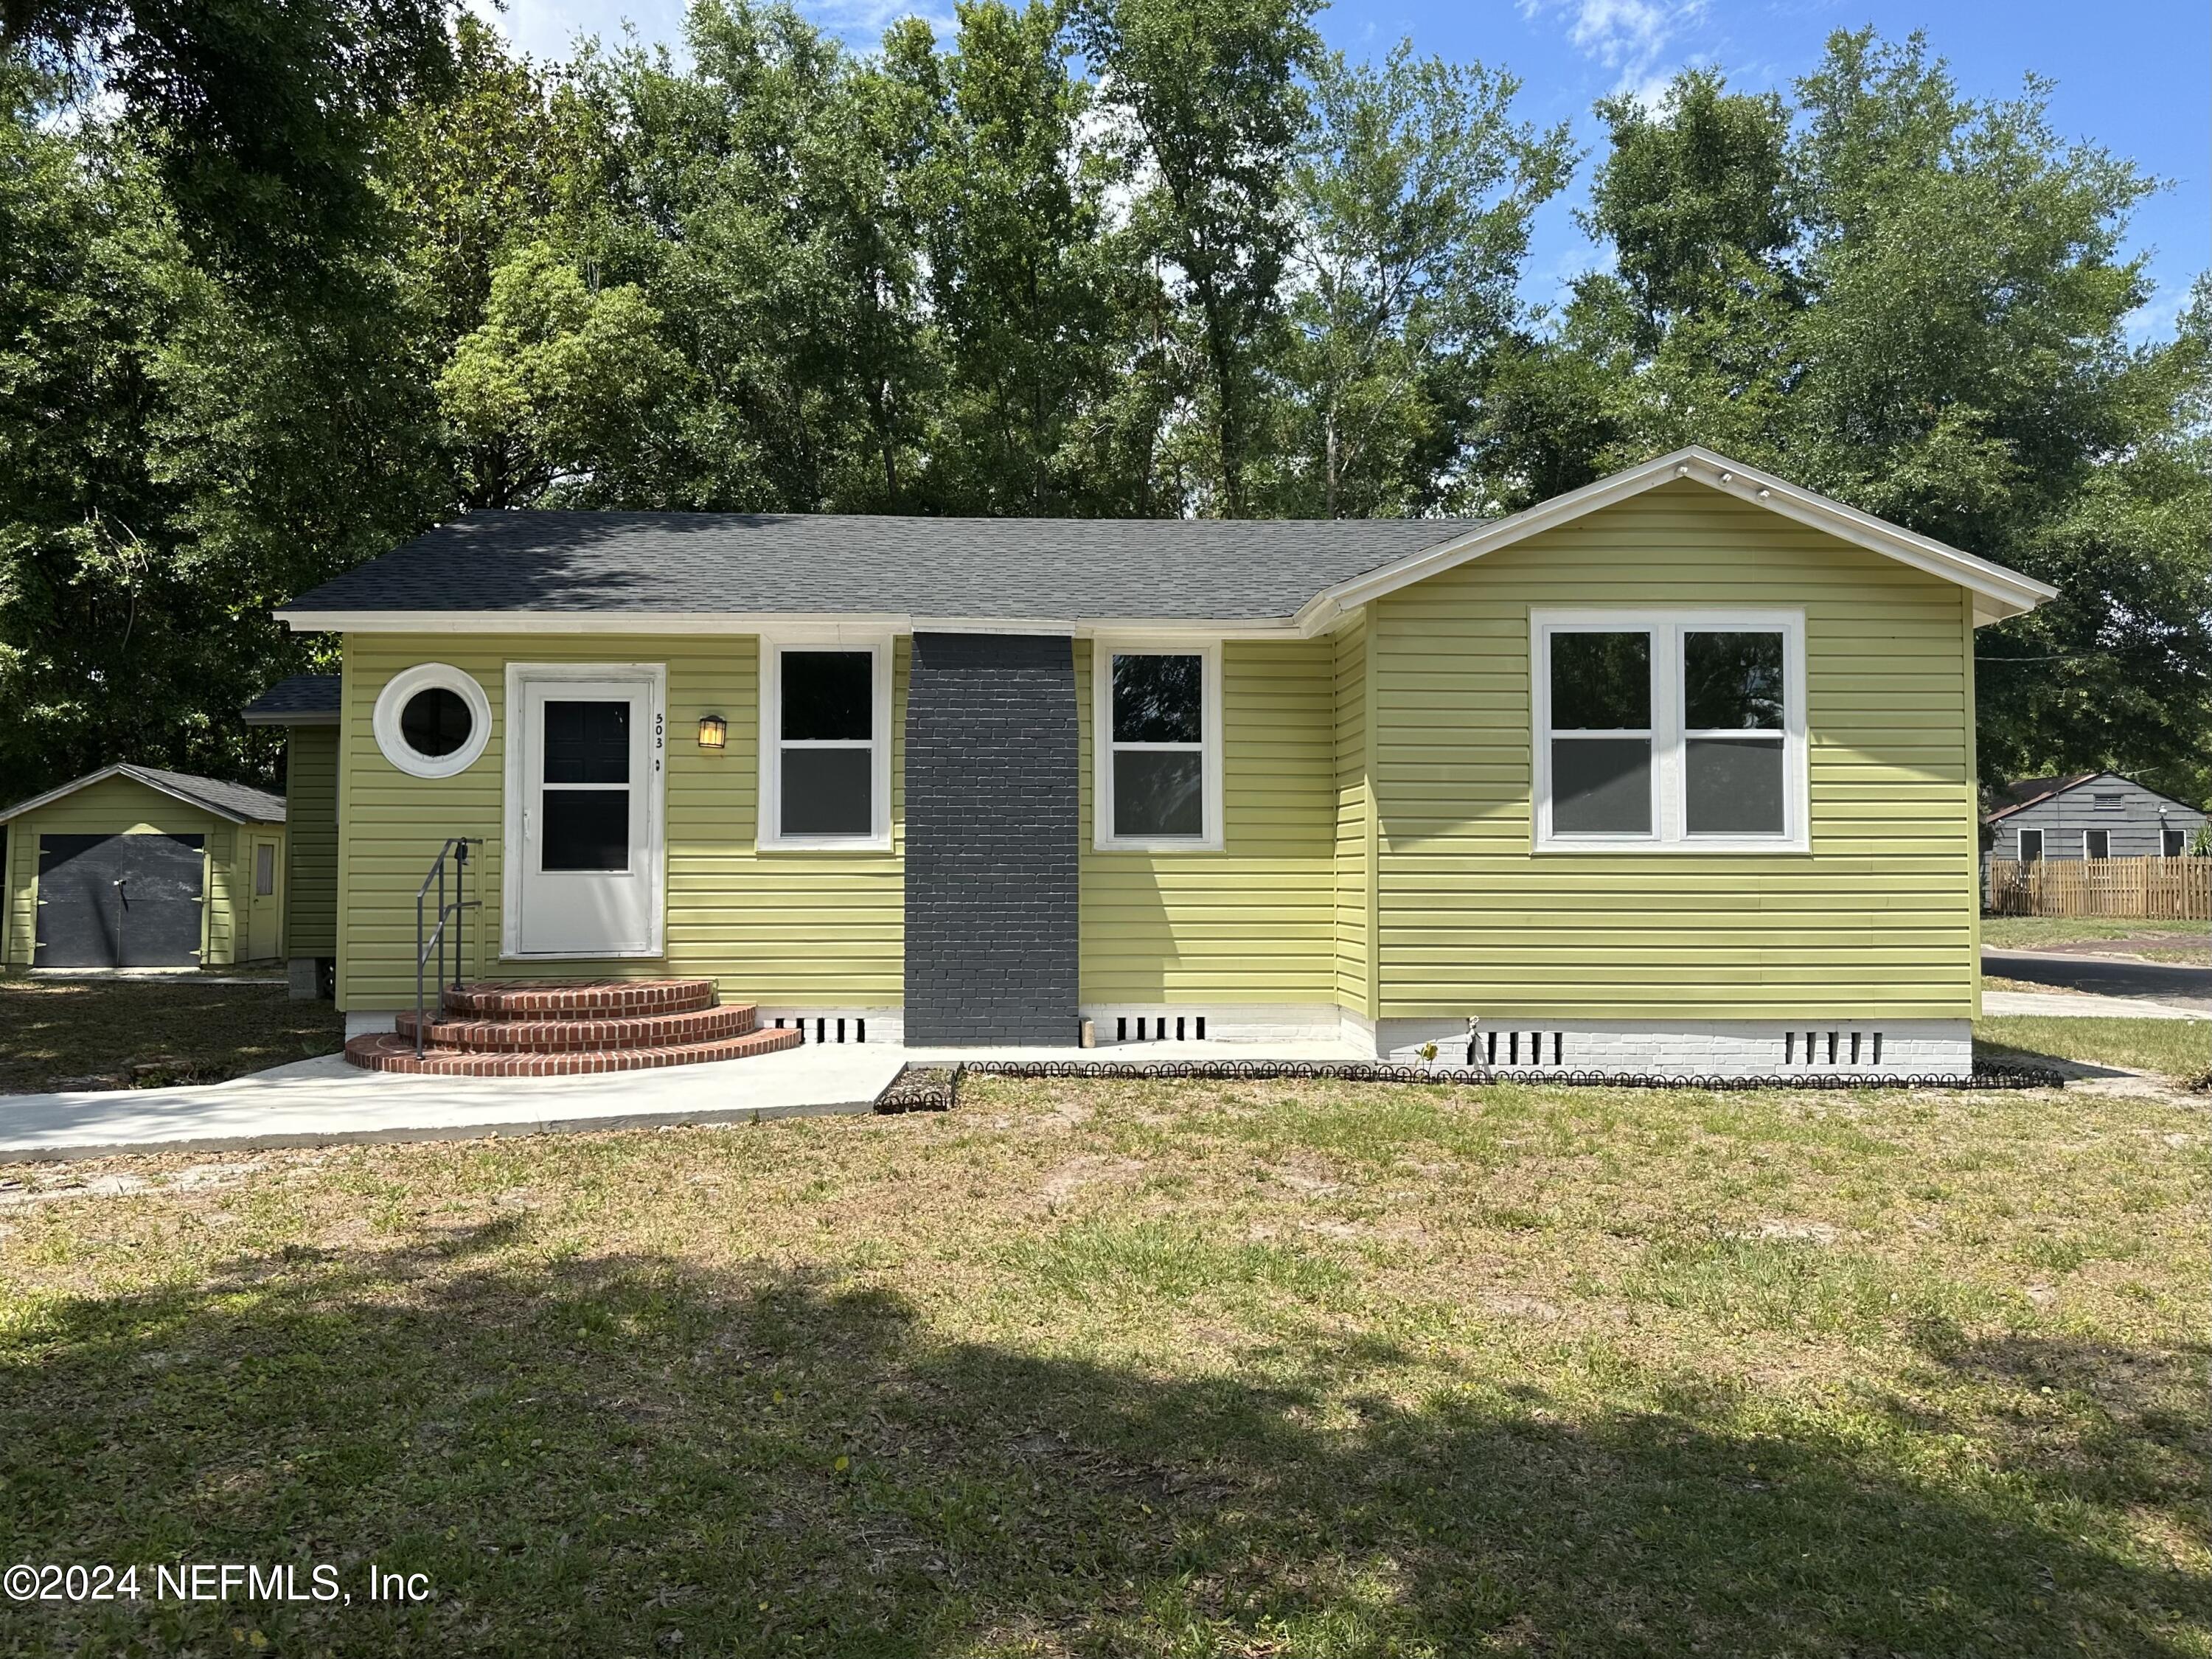 Jacksonville, FL home for sale located at 503 W 63rd Street, Jacksonville, FL 32208